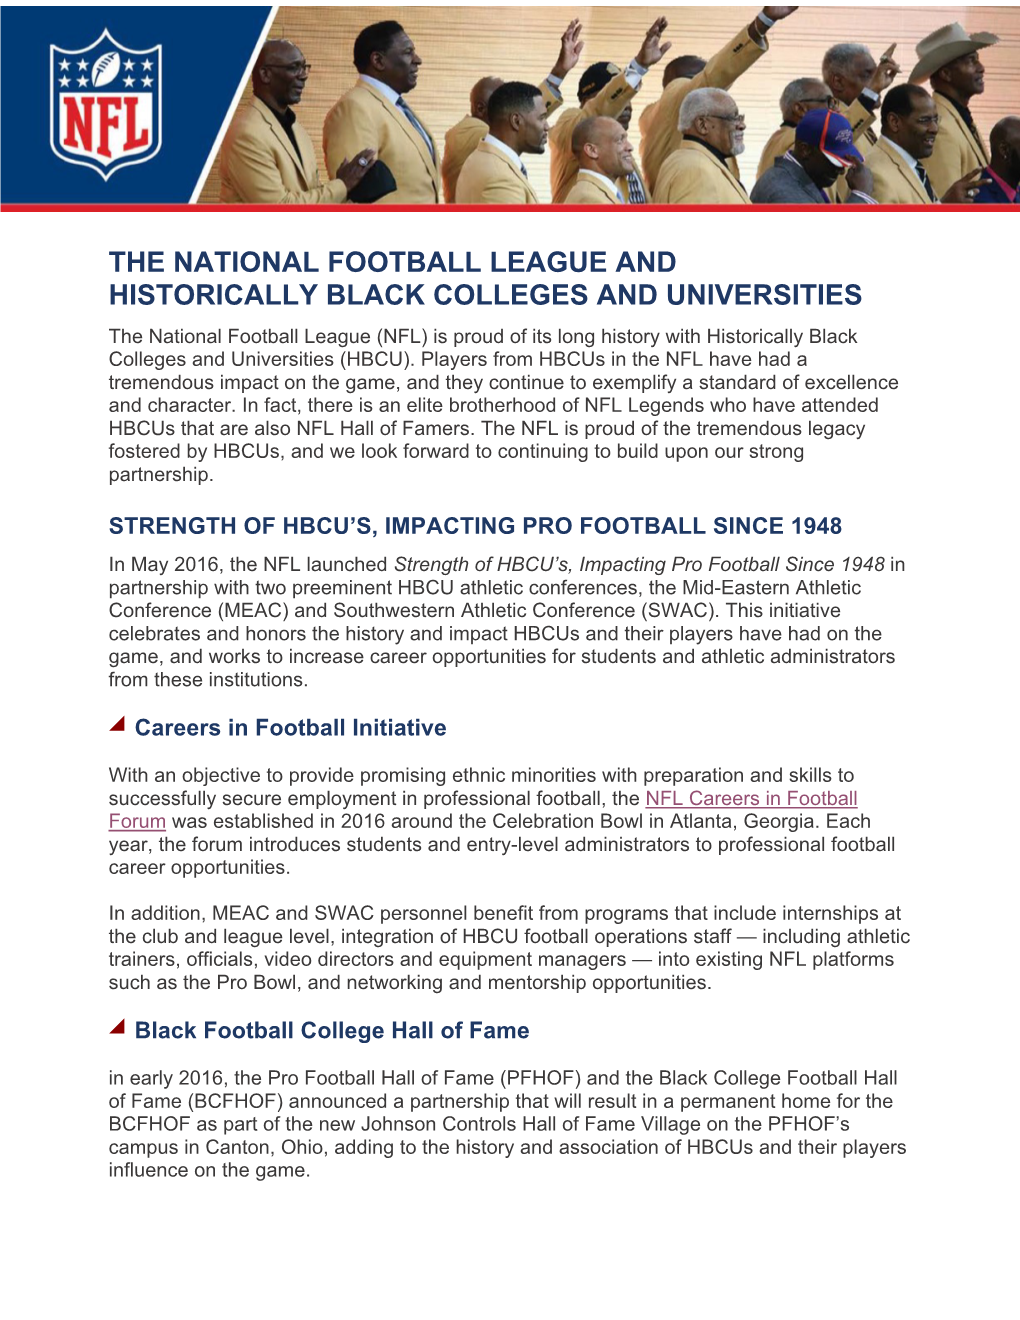 The National Football League and Historically Black Colleges and Universities